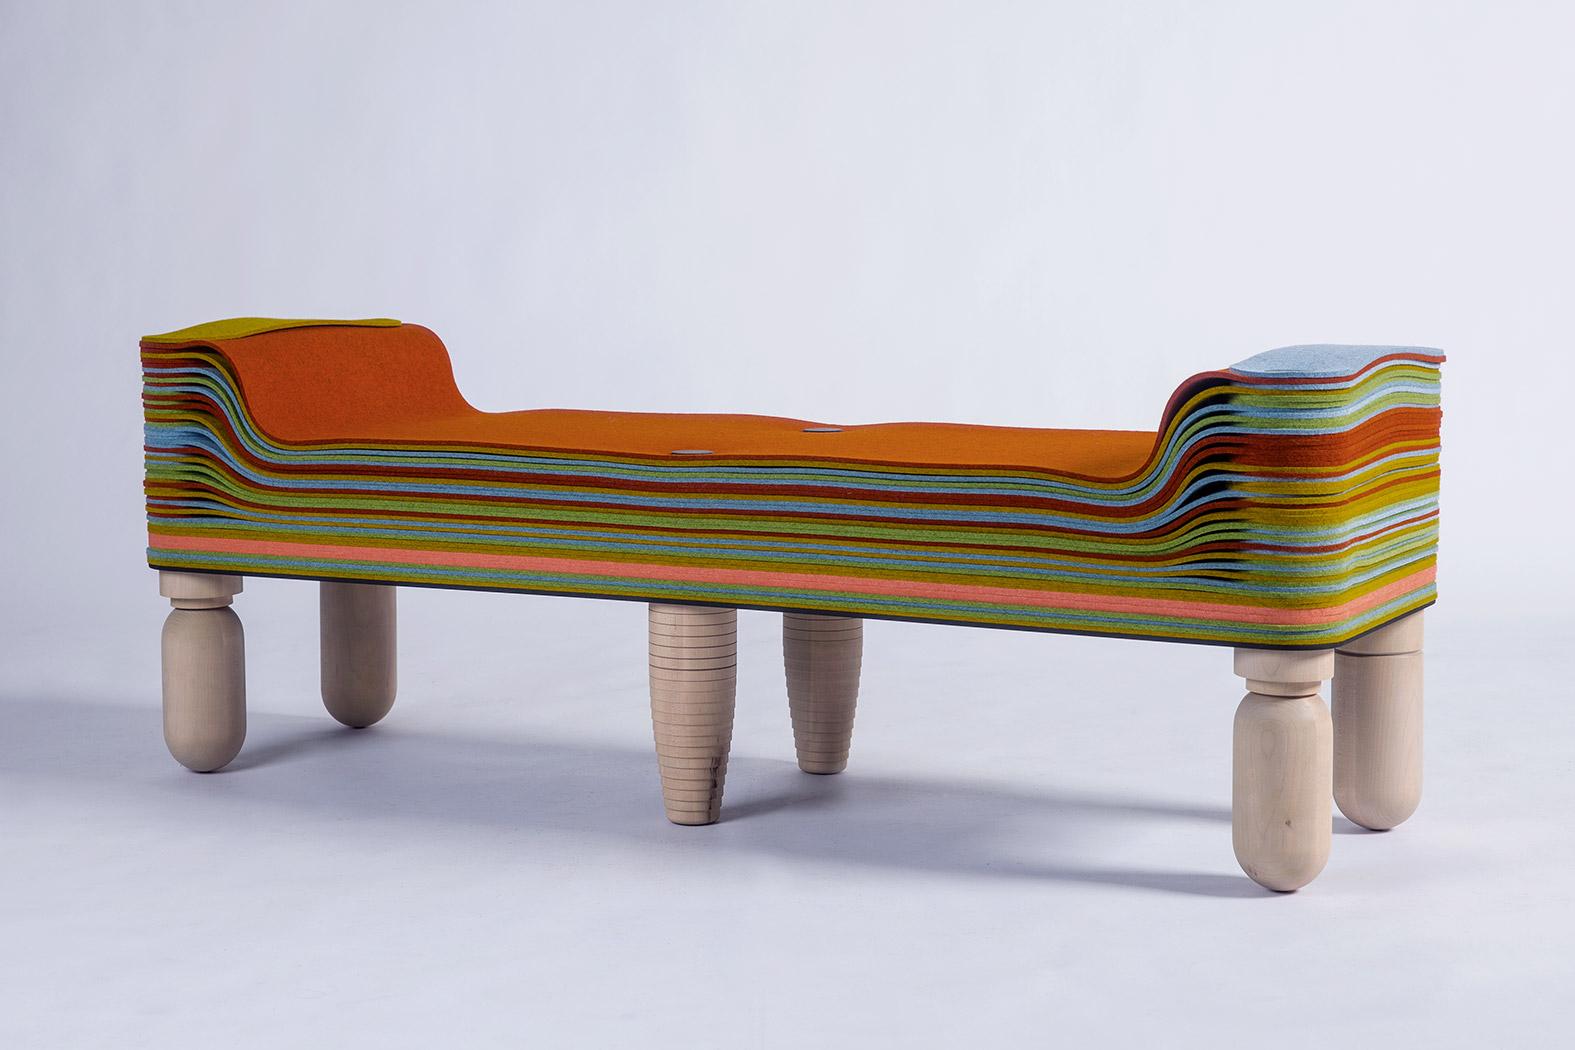 Maxine B, Felt and Wood Bench, Benoist F. Drut in STACKABL, Canada, 2021 For Sale 1